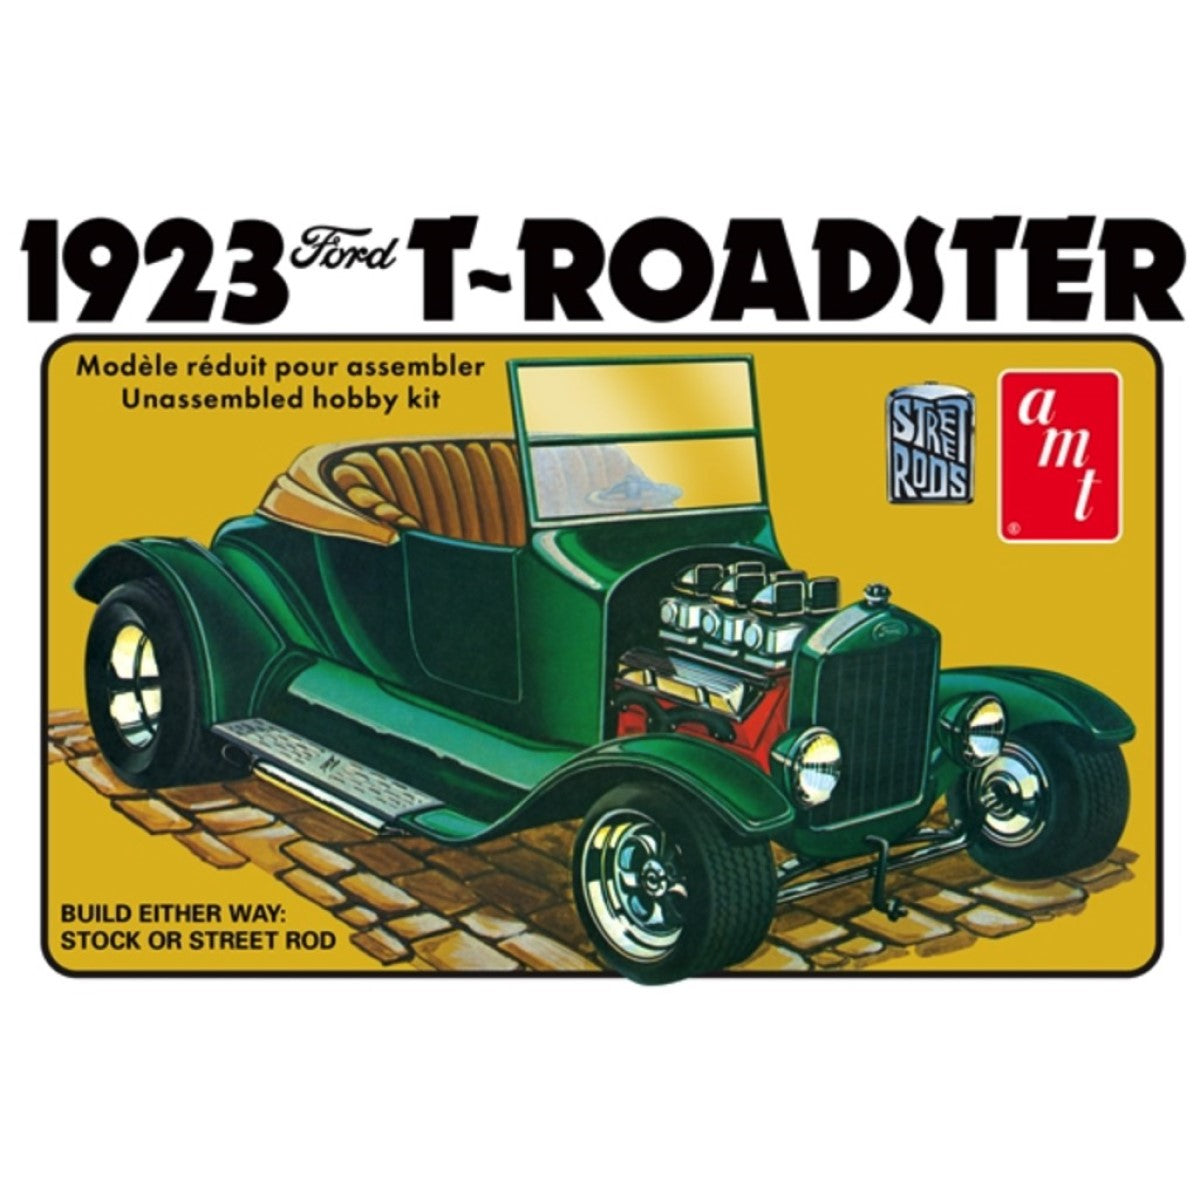 AMT 1/25 Ford T Roadster 1923 AMT1130